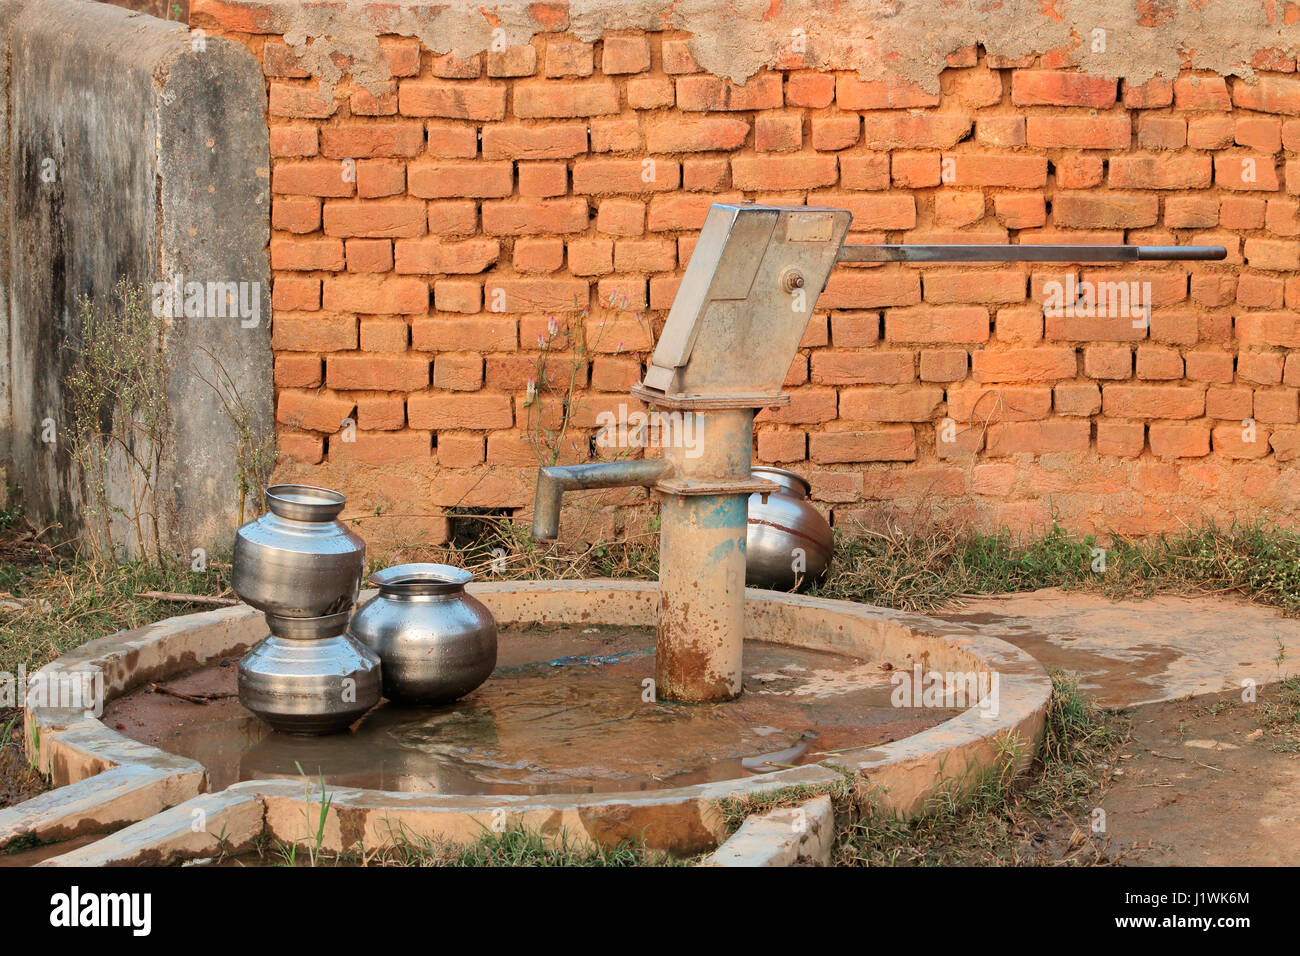 Old hand operated water pump and water containers in rural India Stock Photo